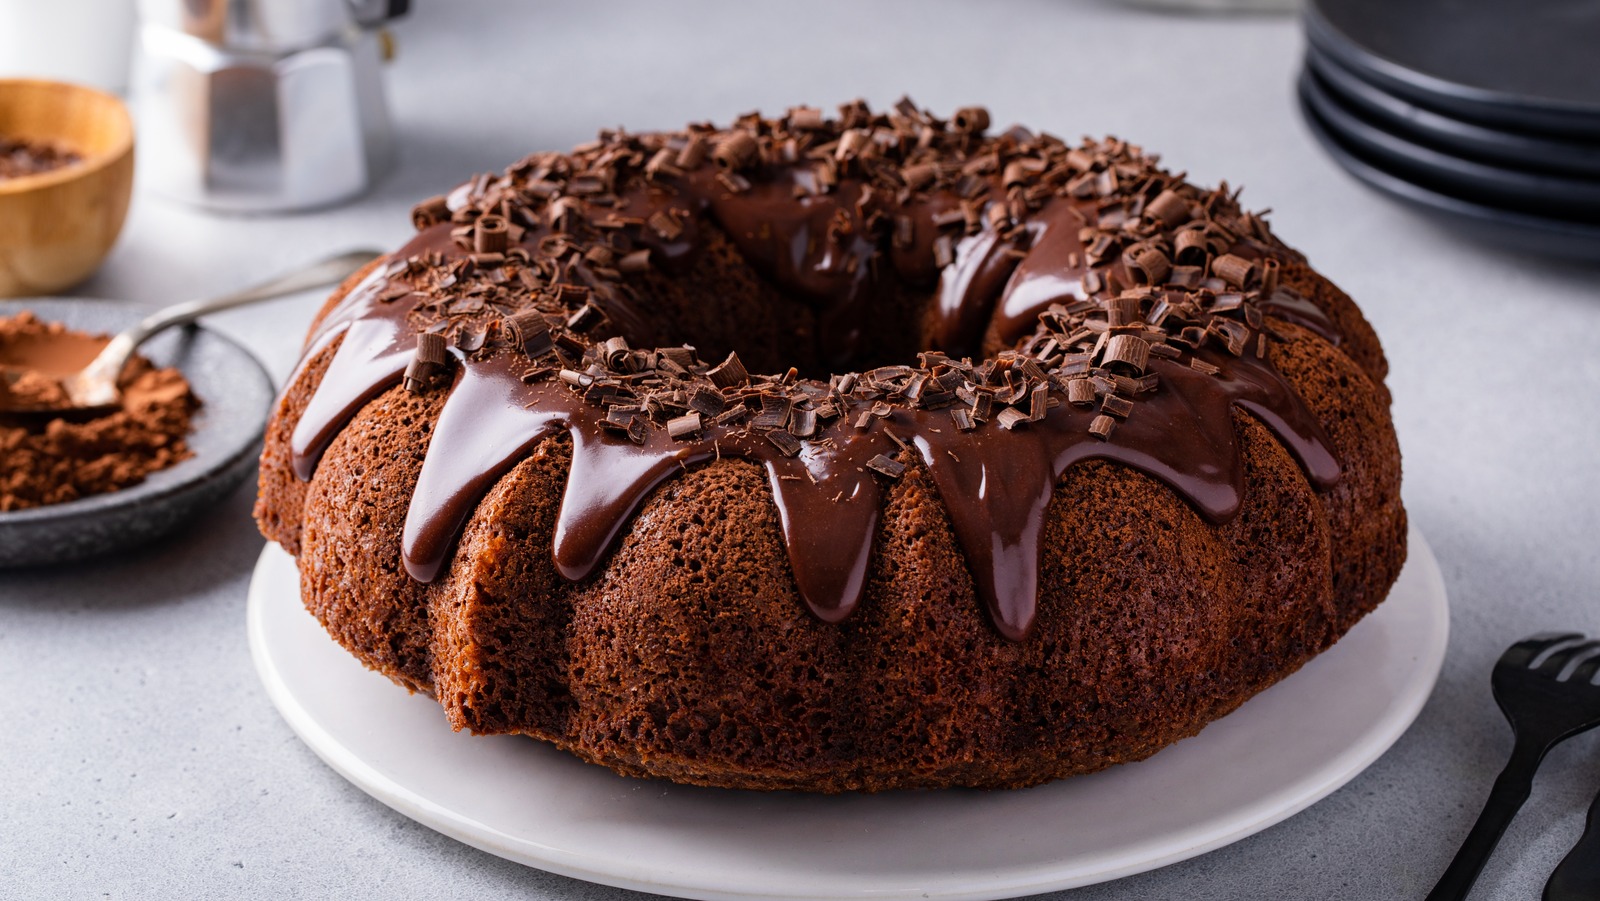 https://www.thedailymeal.com/img/gallery/the-soup-can-hack-that-instantly-turns-any-cake-pan-into-a-bundt-pan/l-intro-1695063409.jpg